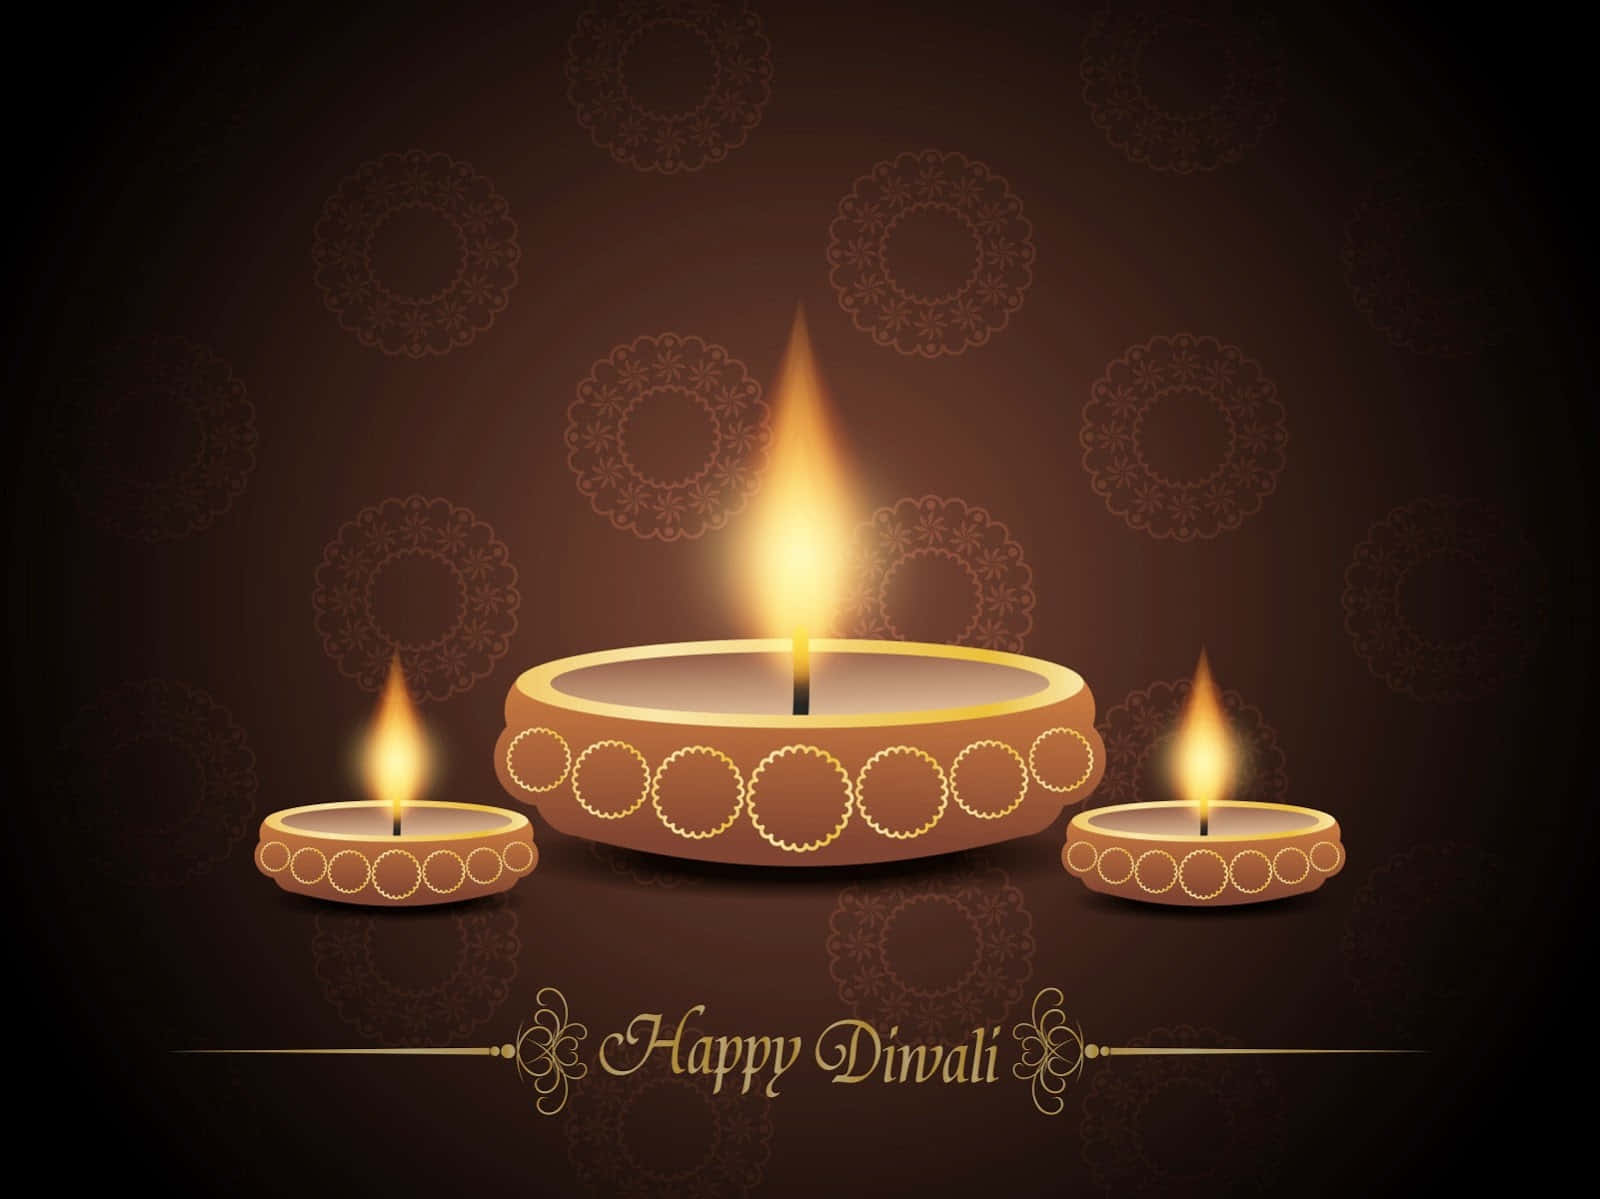 Happy Diwali Greeting Card With Three Lit Candles